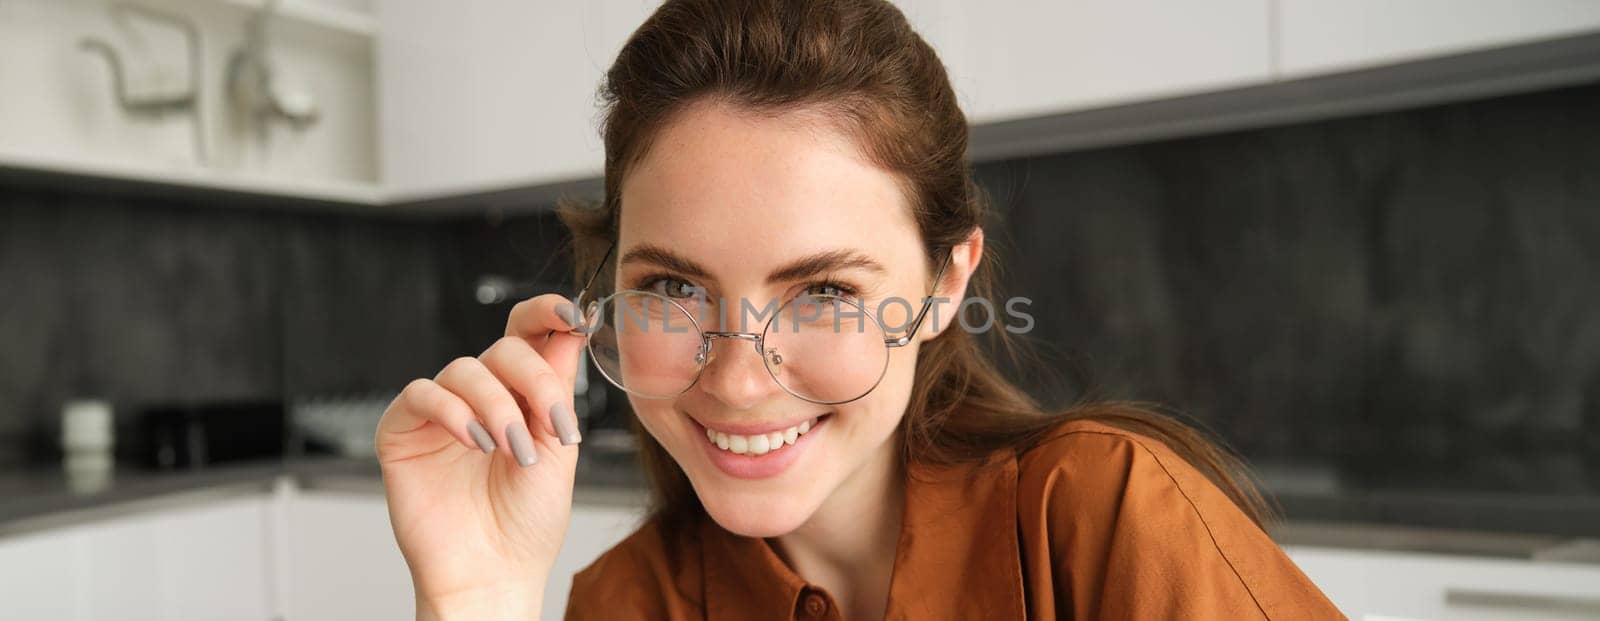 Close up portrait of happy, carefree young woman in her new glasses, showing her eyewear, laughing and smiling, posing in kitchen.